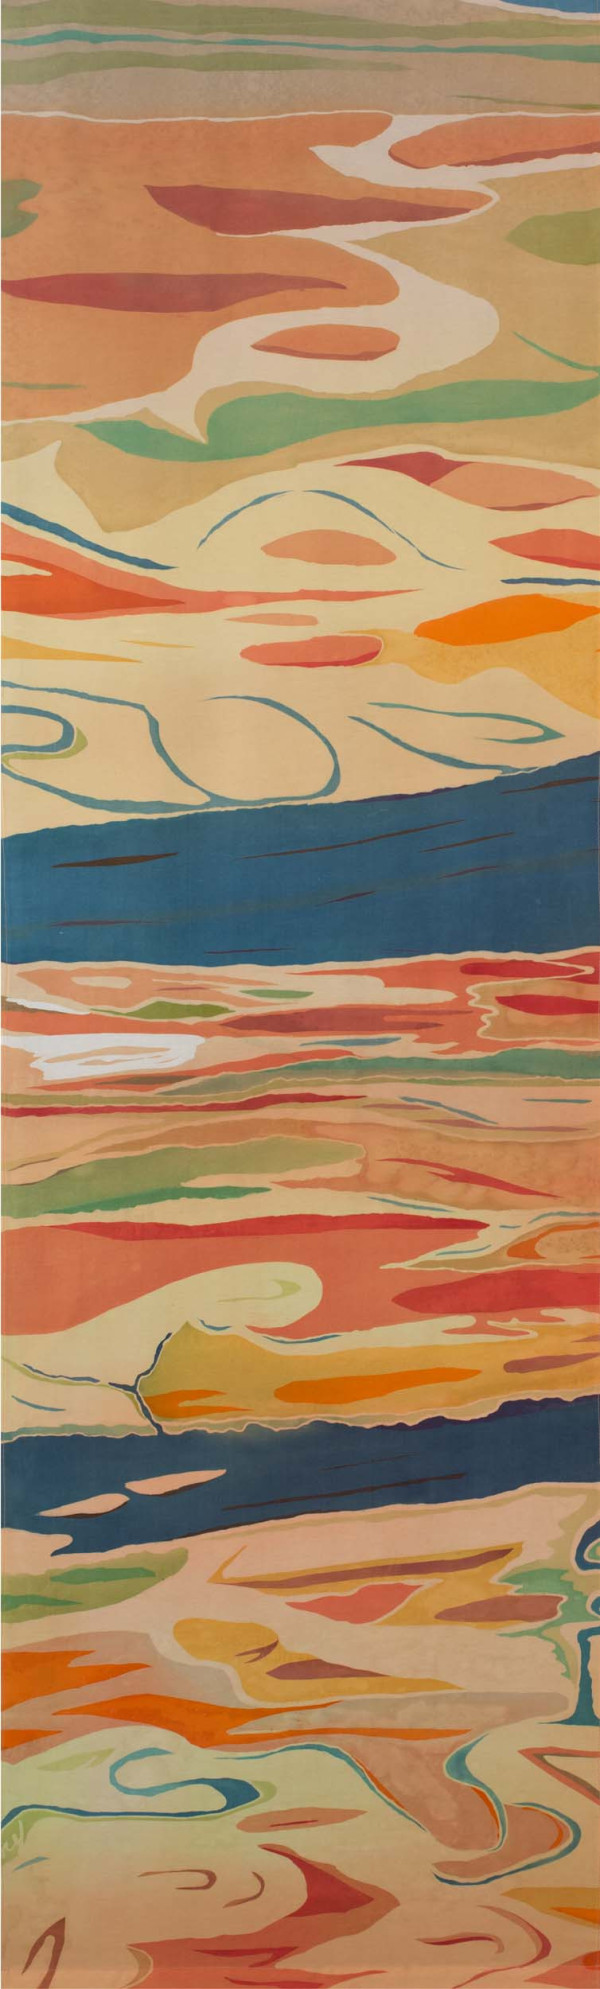 Sacred Waterway I(diptych) by Mary Edna Fraser